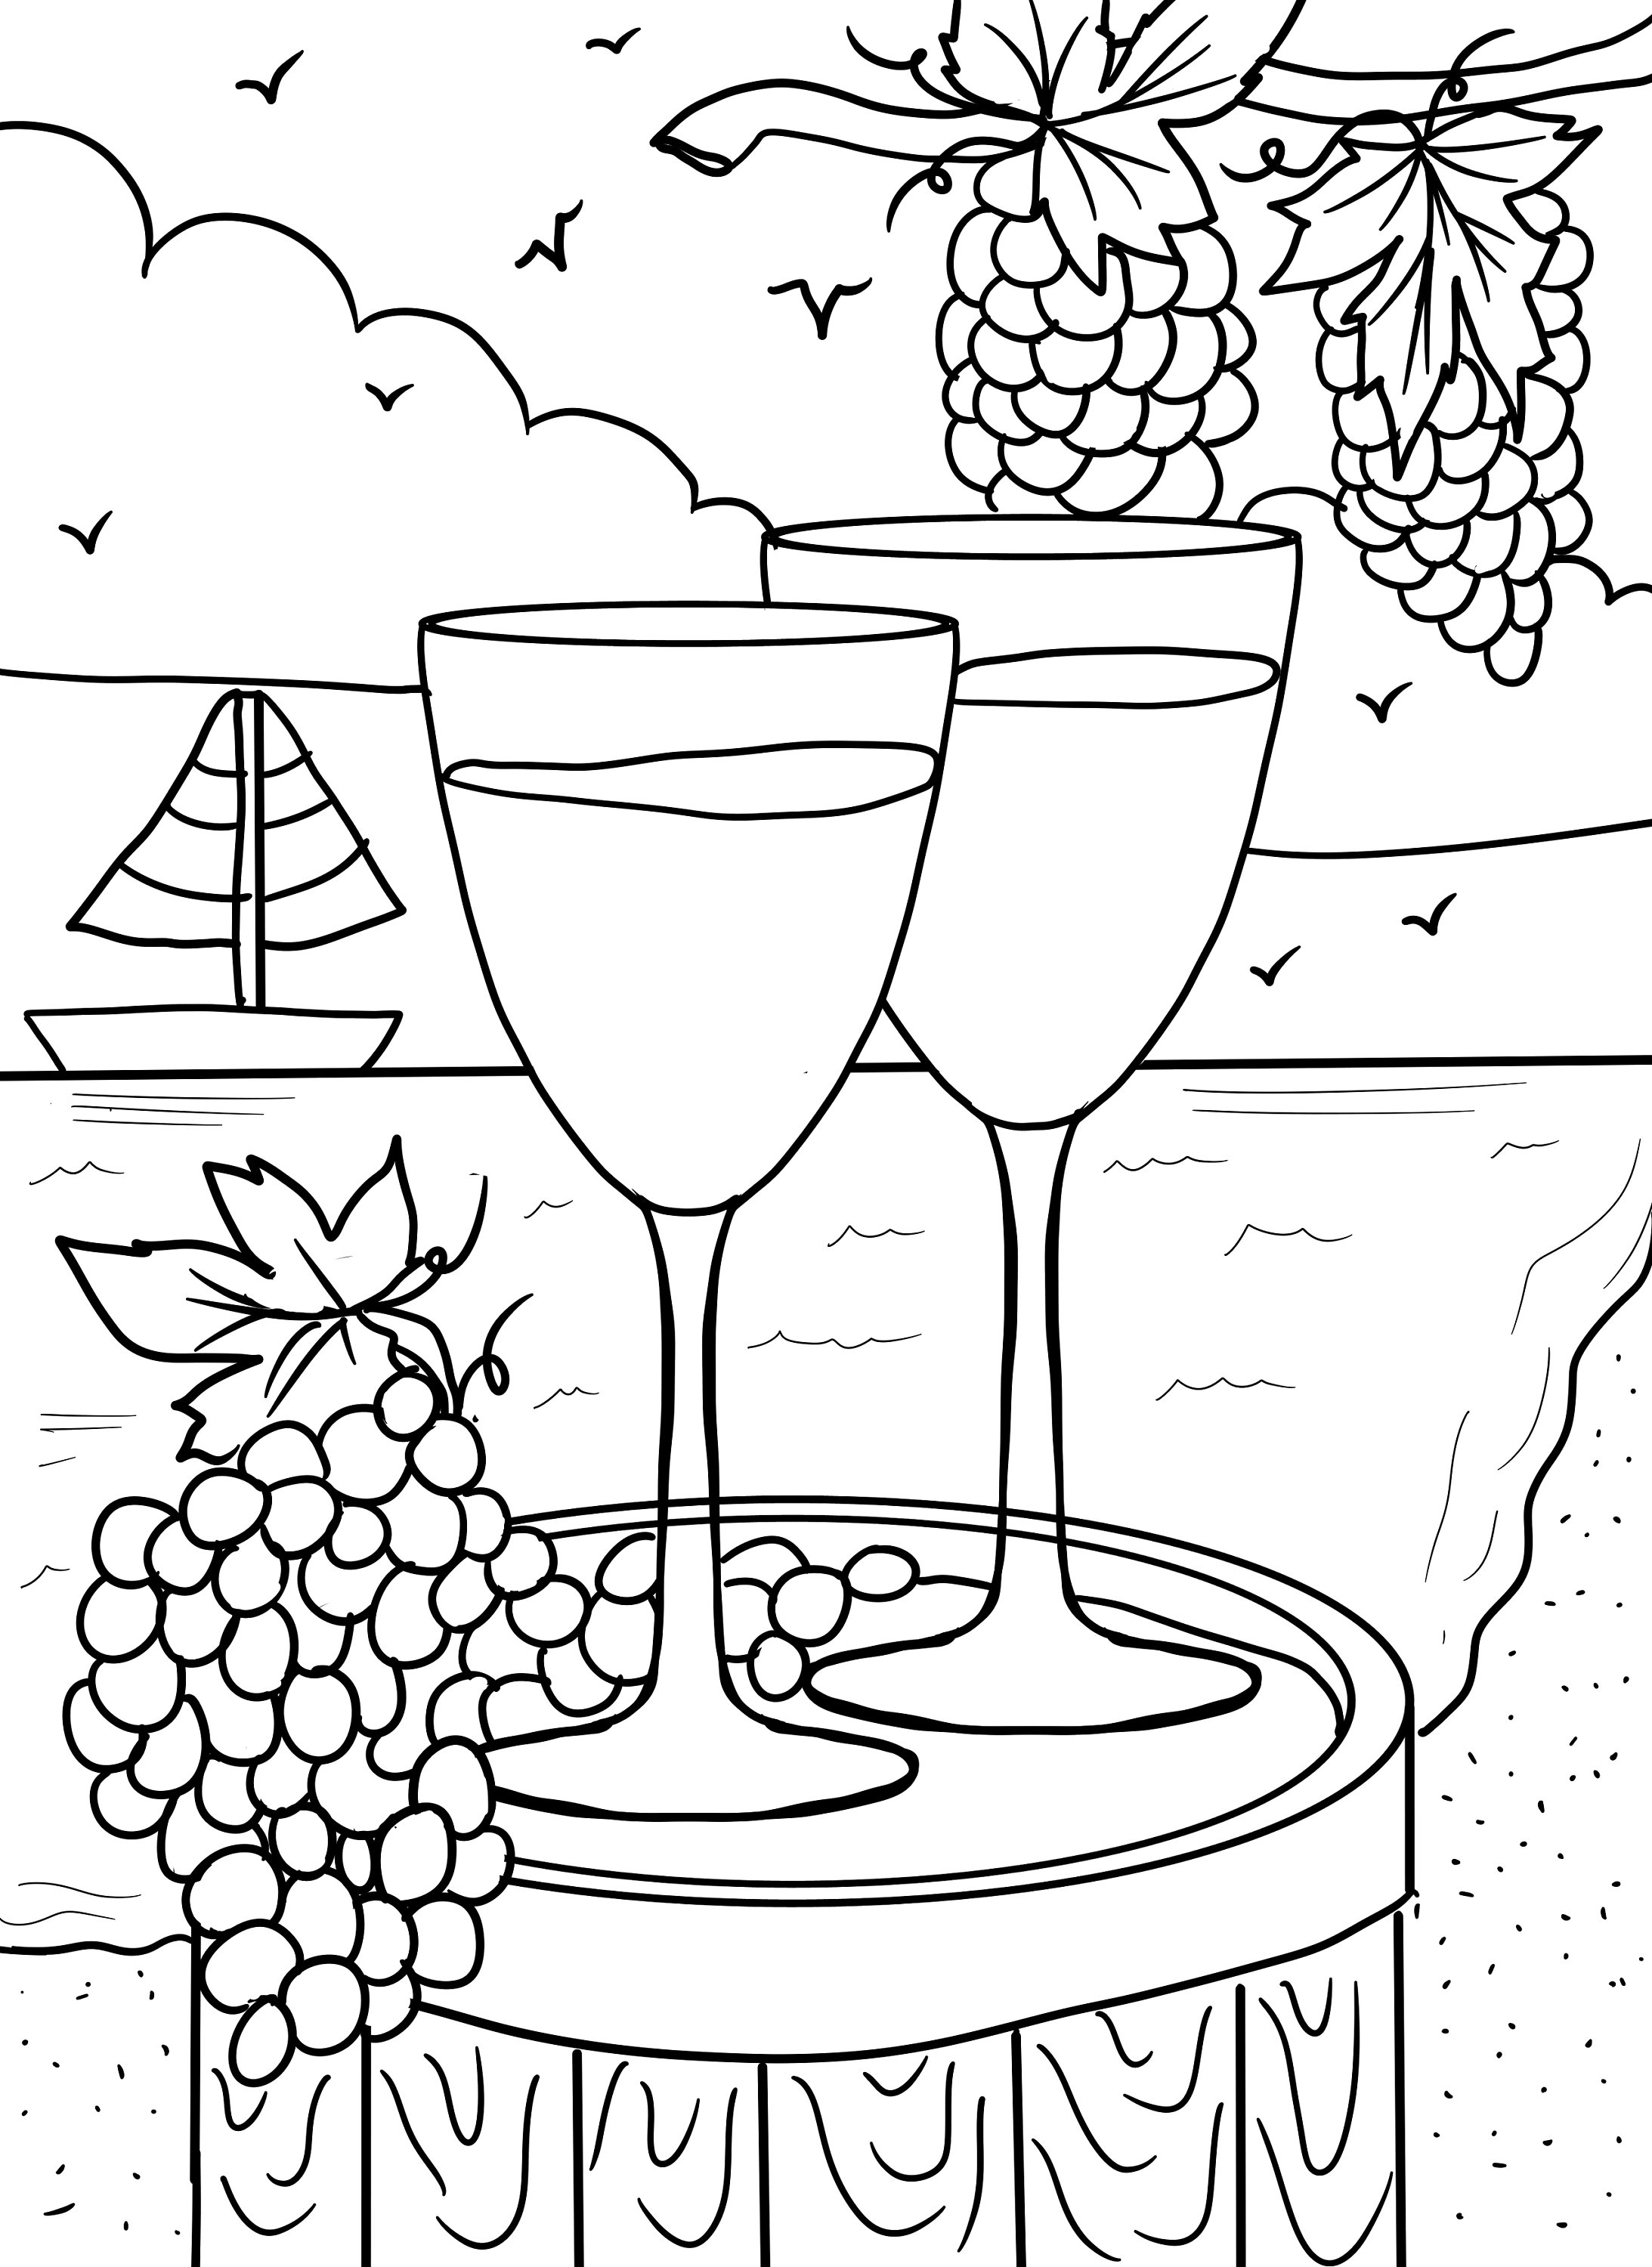 Wine and Sailboat Coloring Page Digital Download .PDF - Etsy